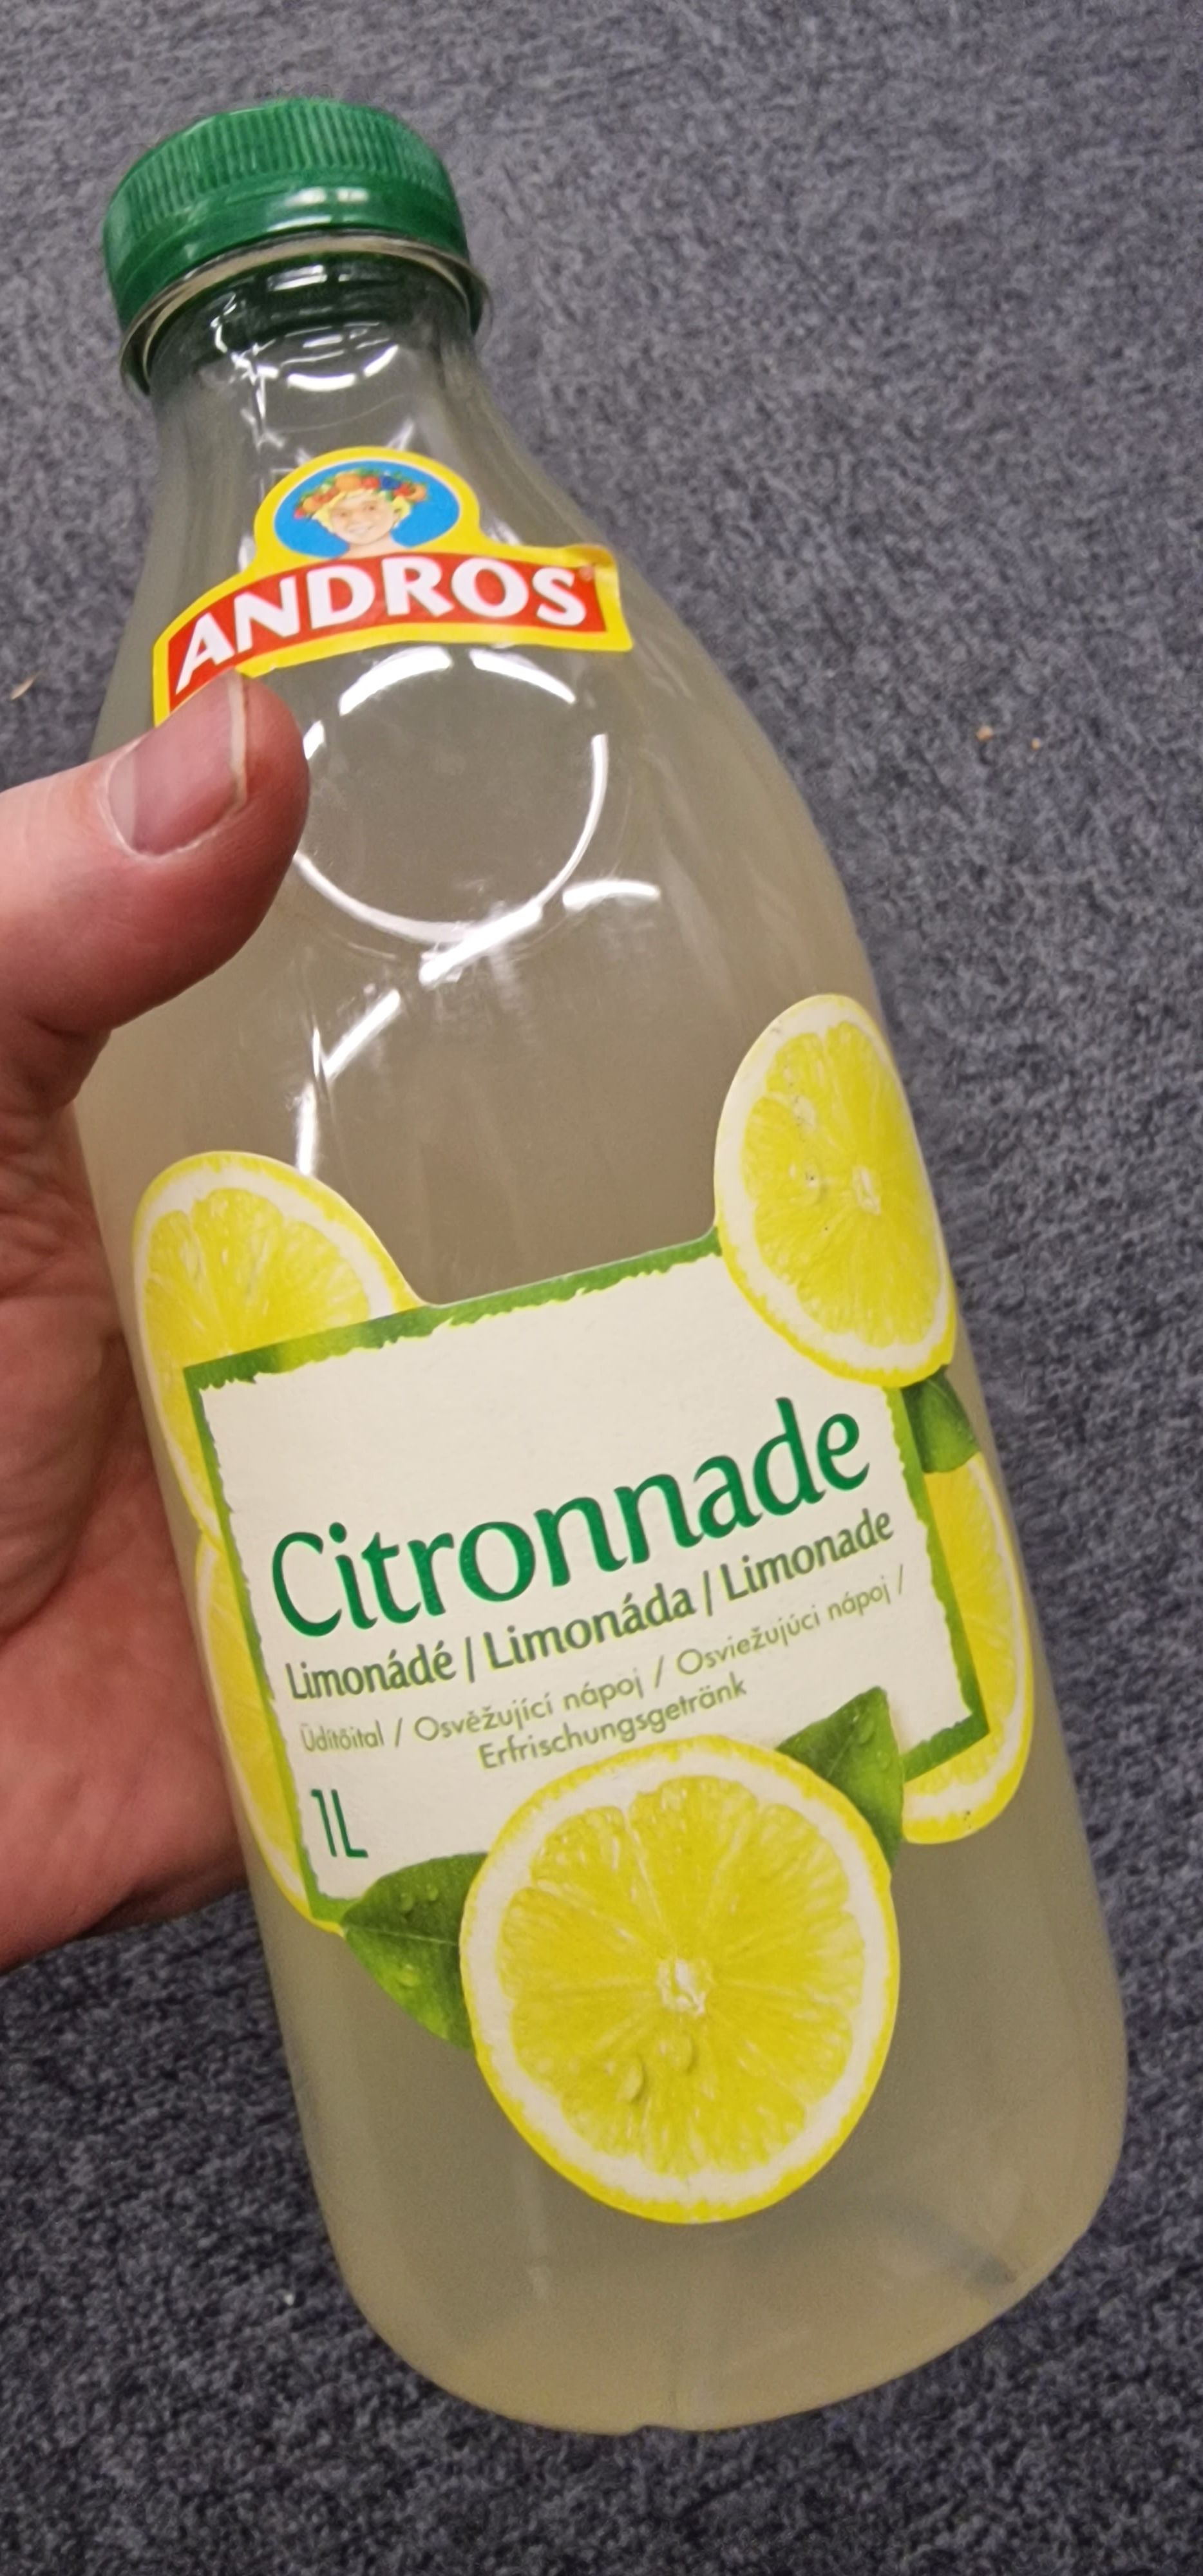 ANDROS Citronnade